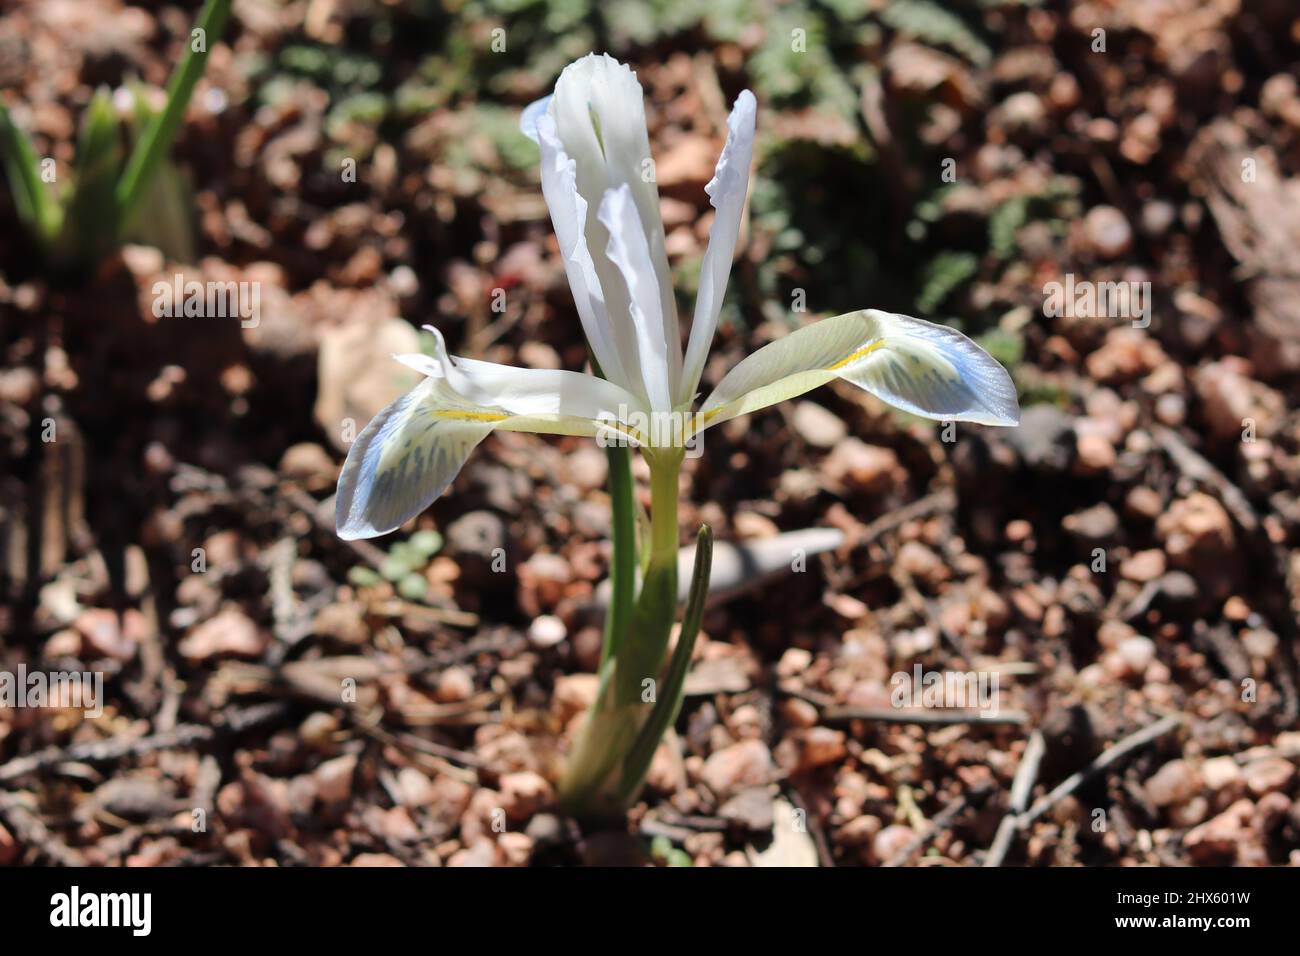 Close up of a white dwarf iris or Iris reticulata from a garden in Payson, Arizona. Stock Photo